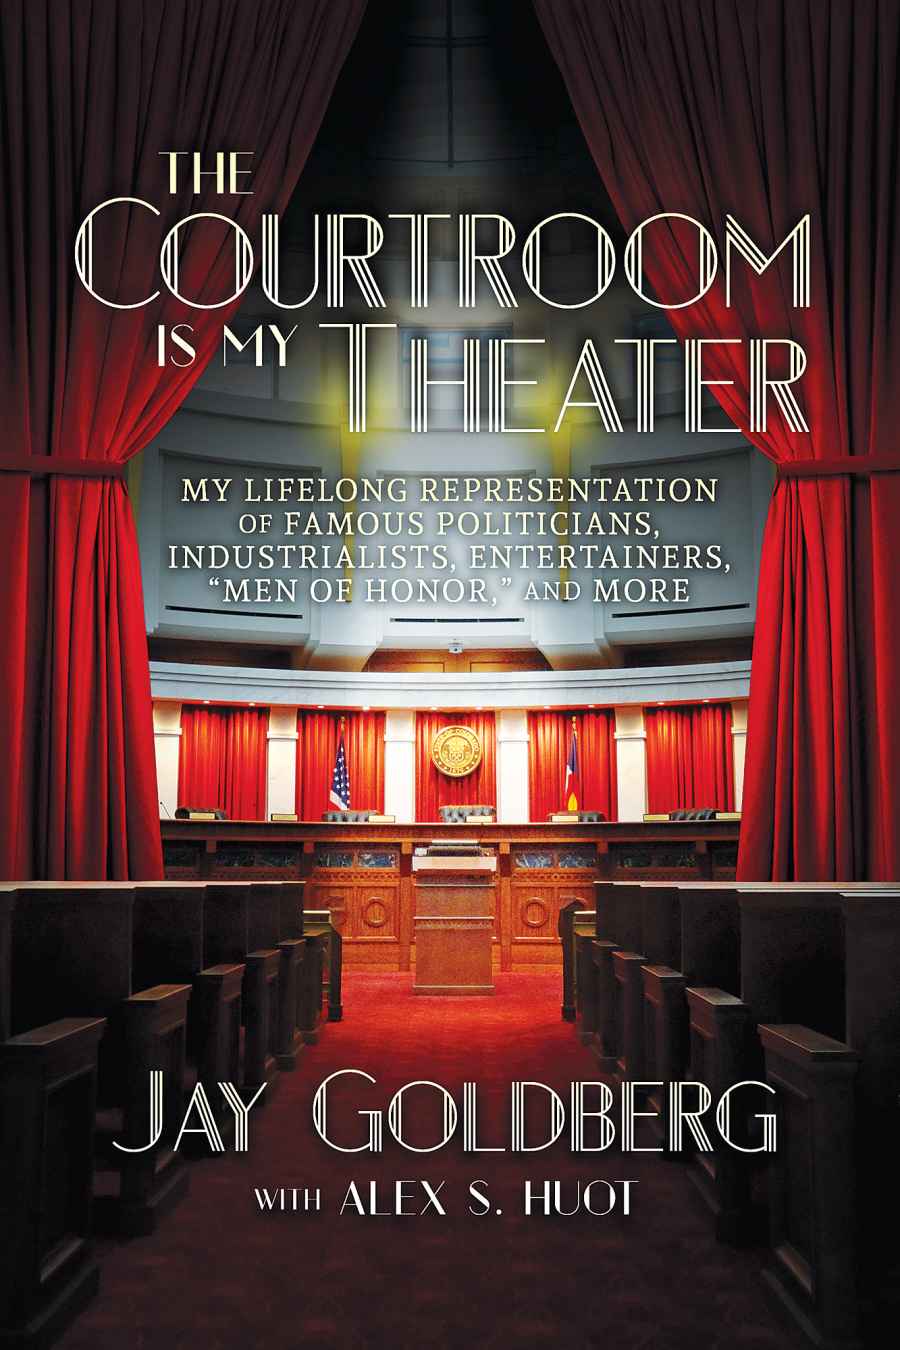 Buzzzz-o-meter The Courtroom Is My Theater Jay Goldberg